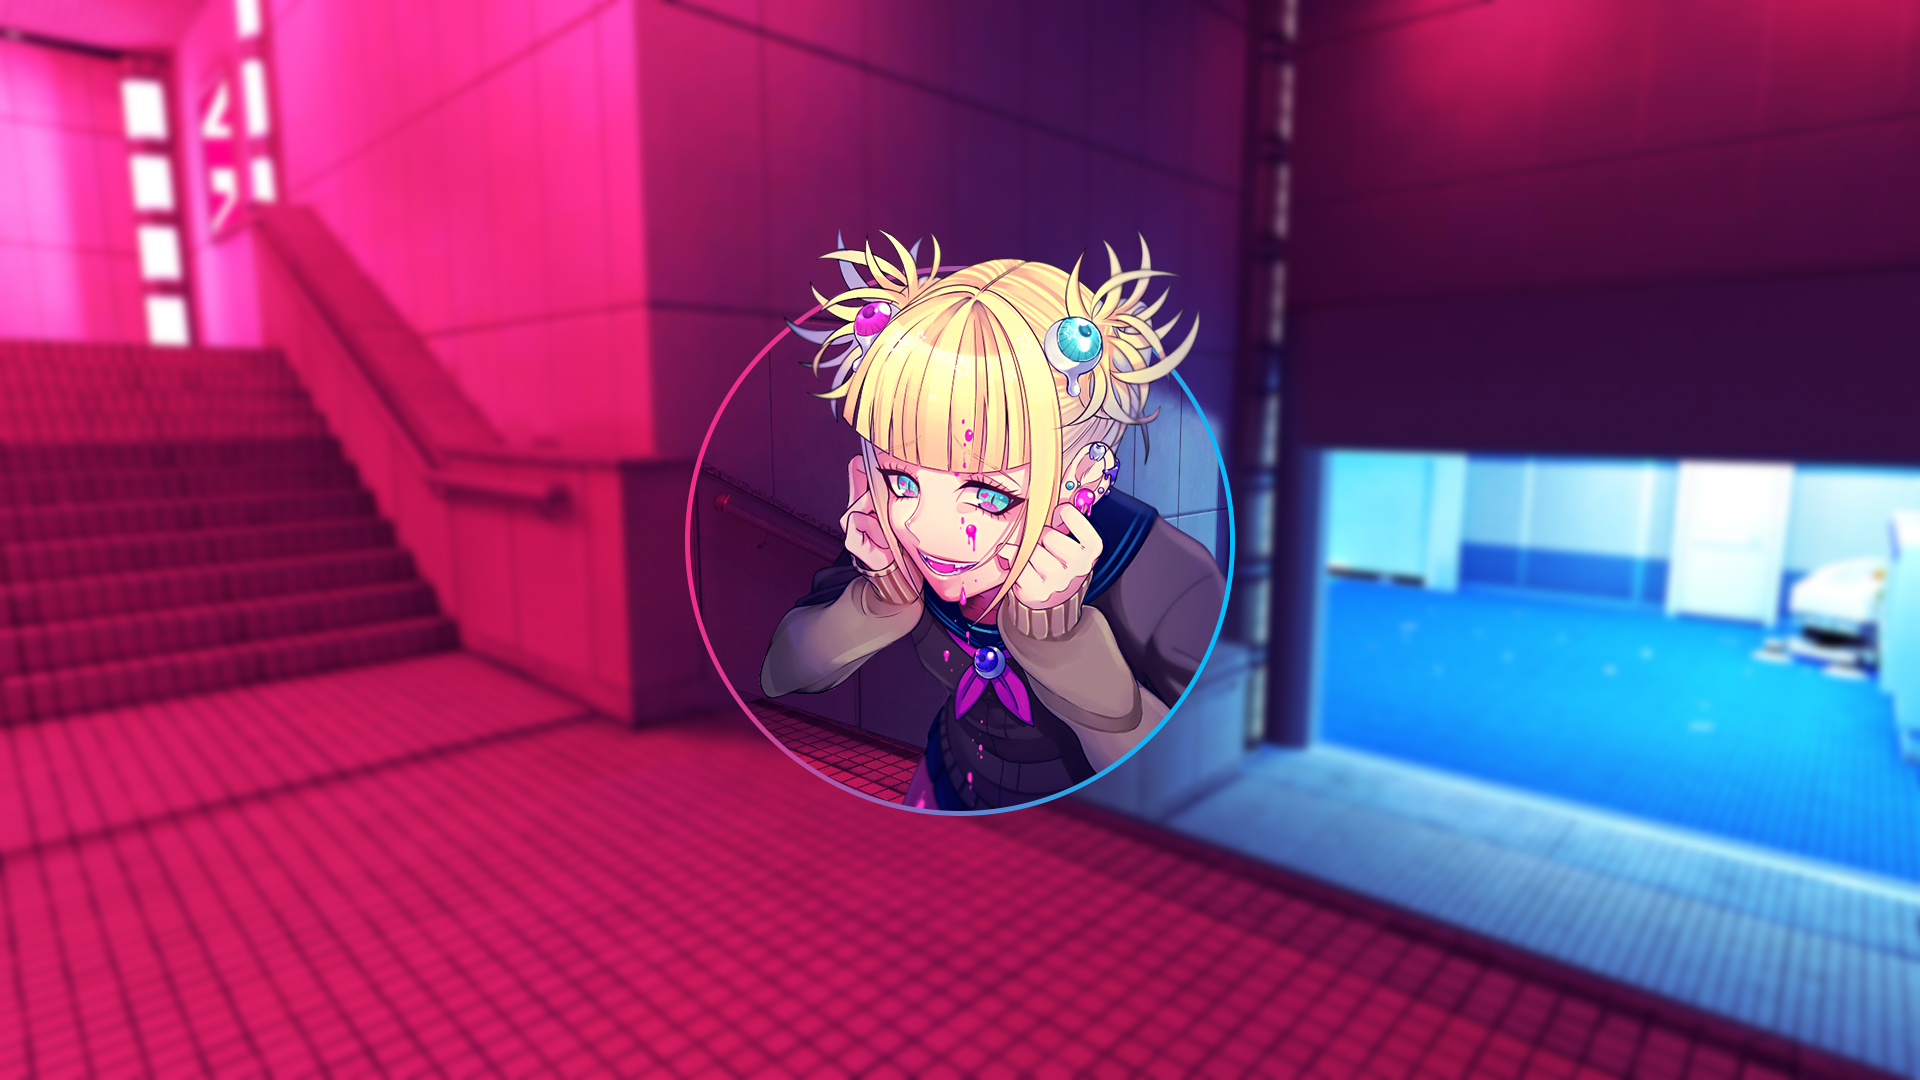 Anime 1920x1080 anime manga blurred landscape render in shapes Boku no Hero Academia Himiko Toga Mirror's Edge anime girls circle blonde aqua eyes picture-in-picture